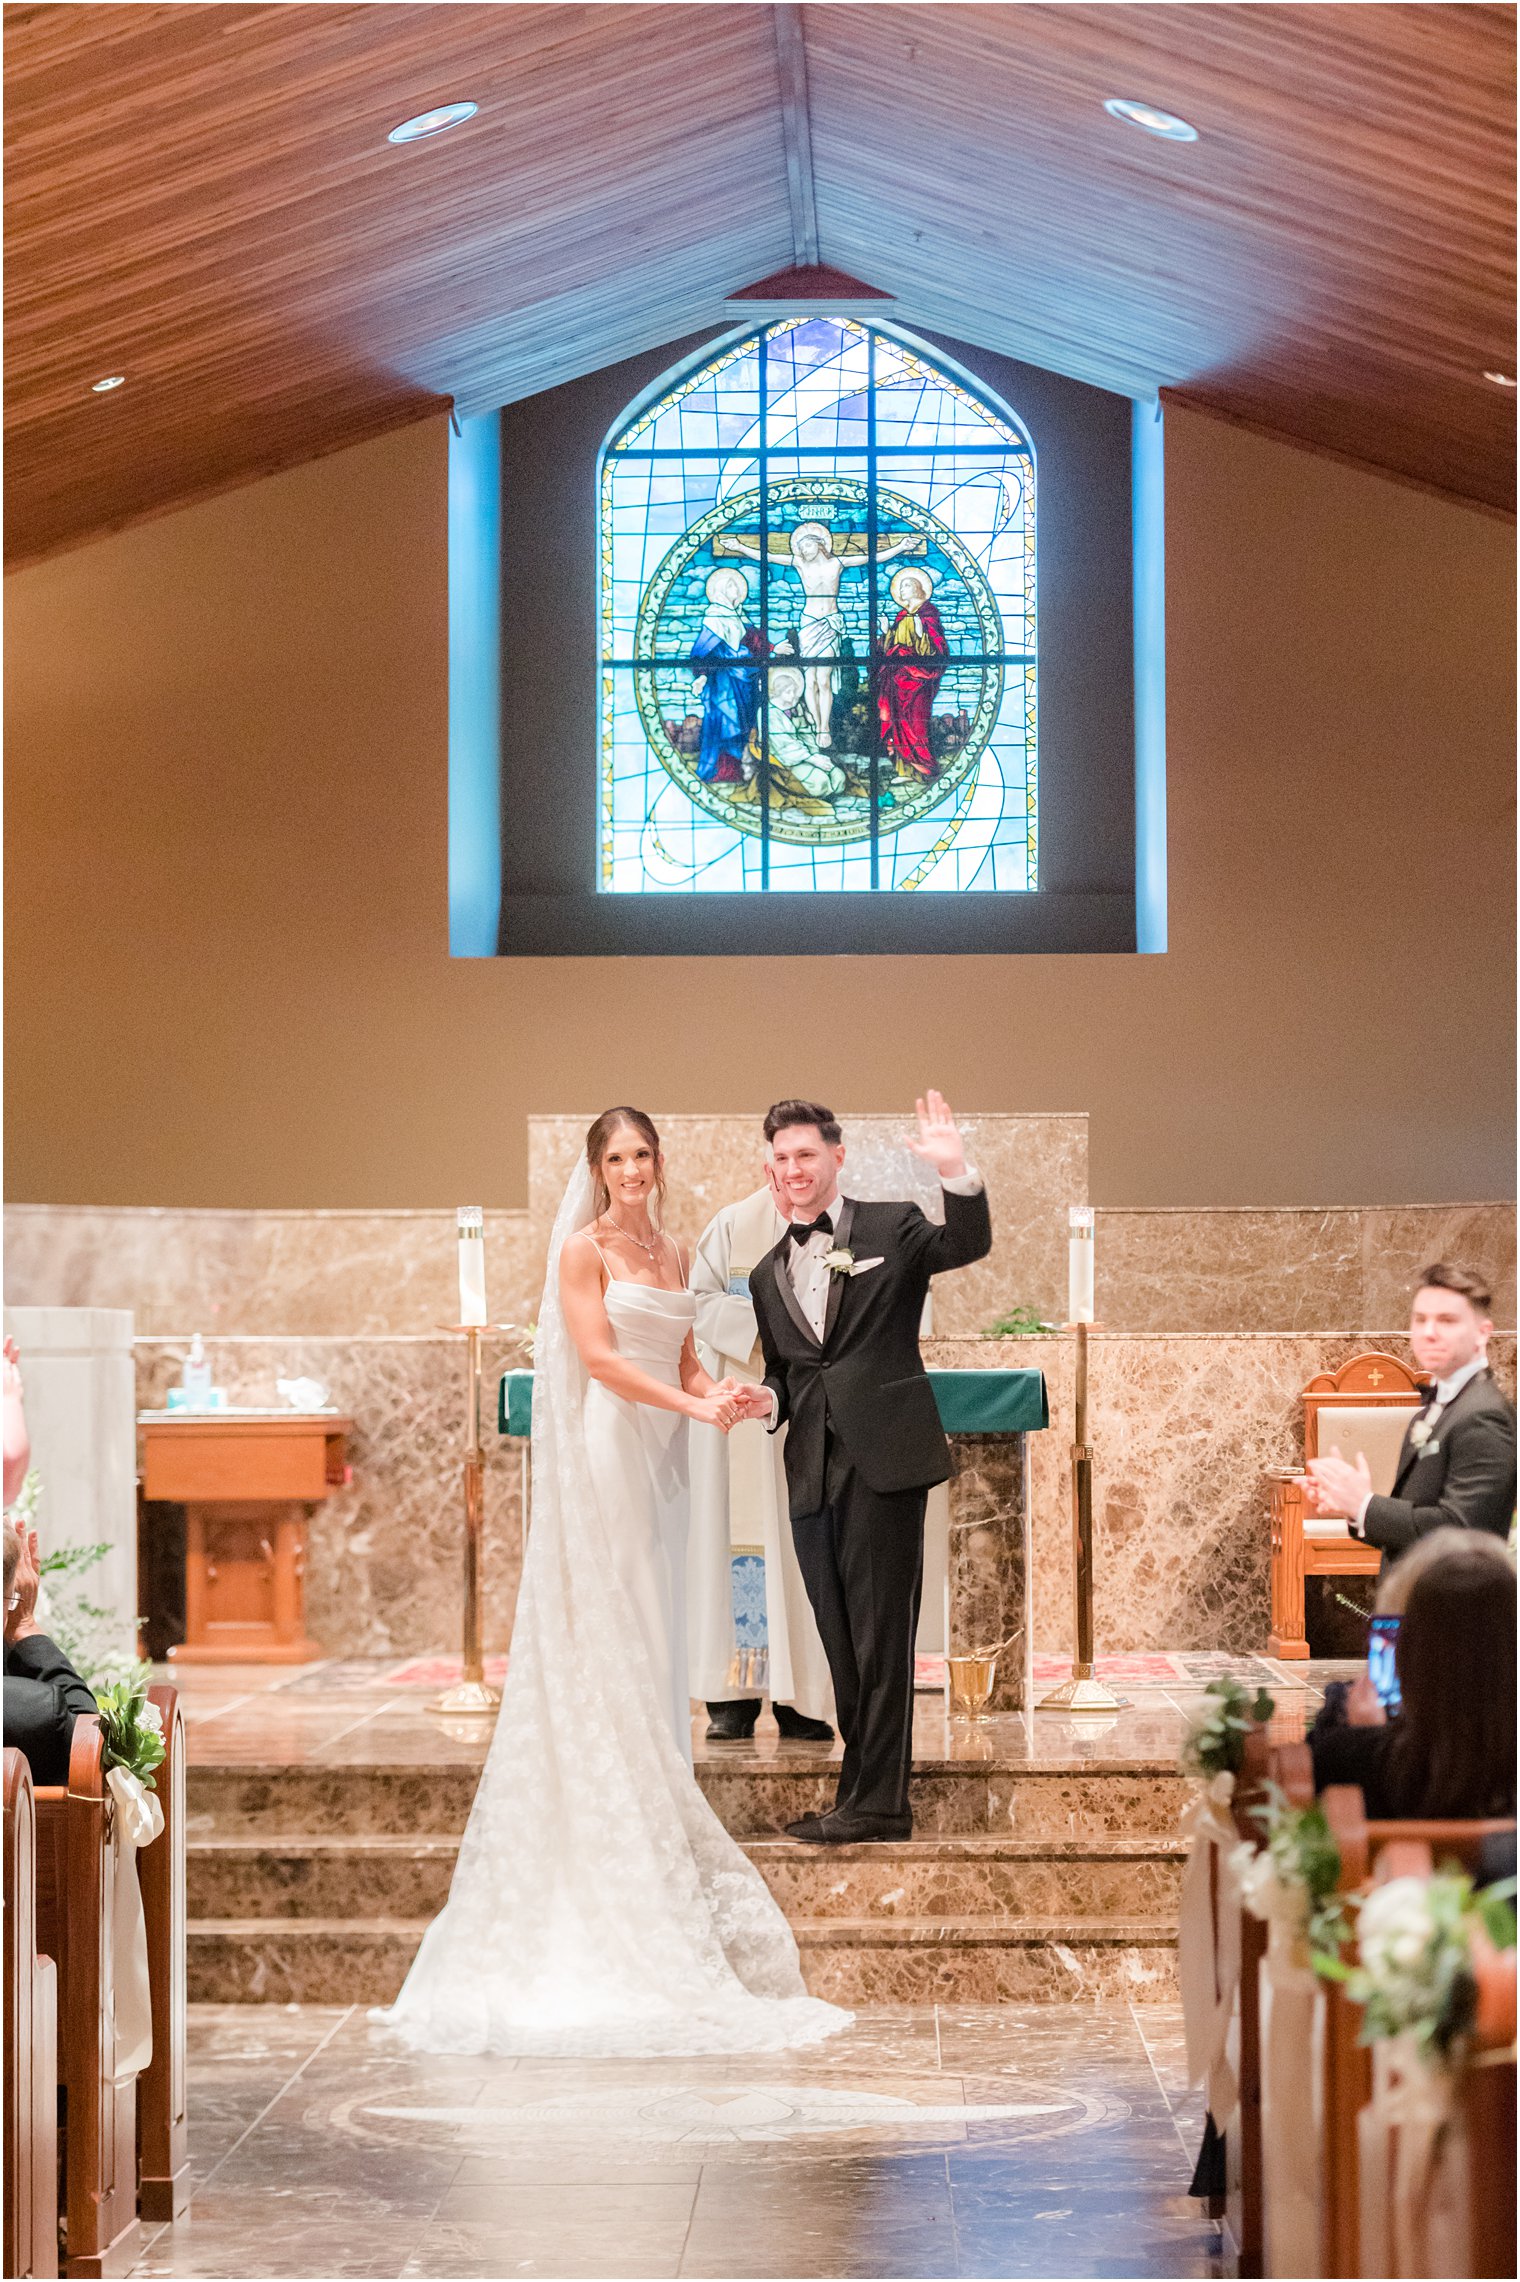 bride and groom smile at guests standing at alter during traditional church ceremony in small New Jersey church